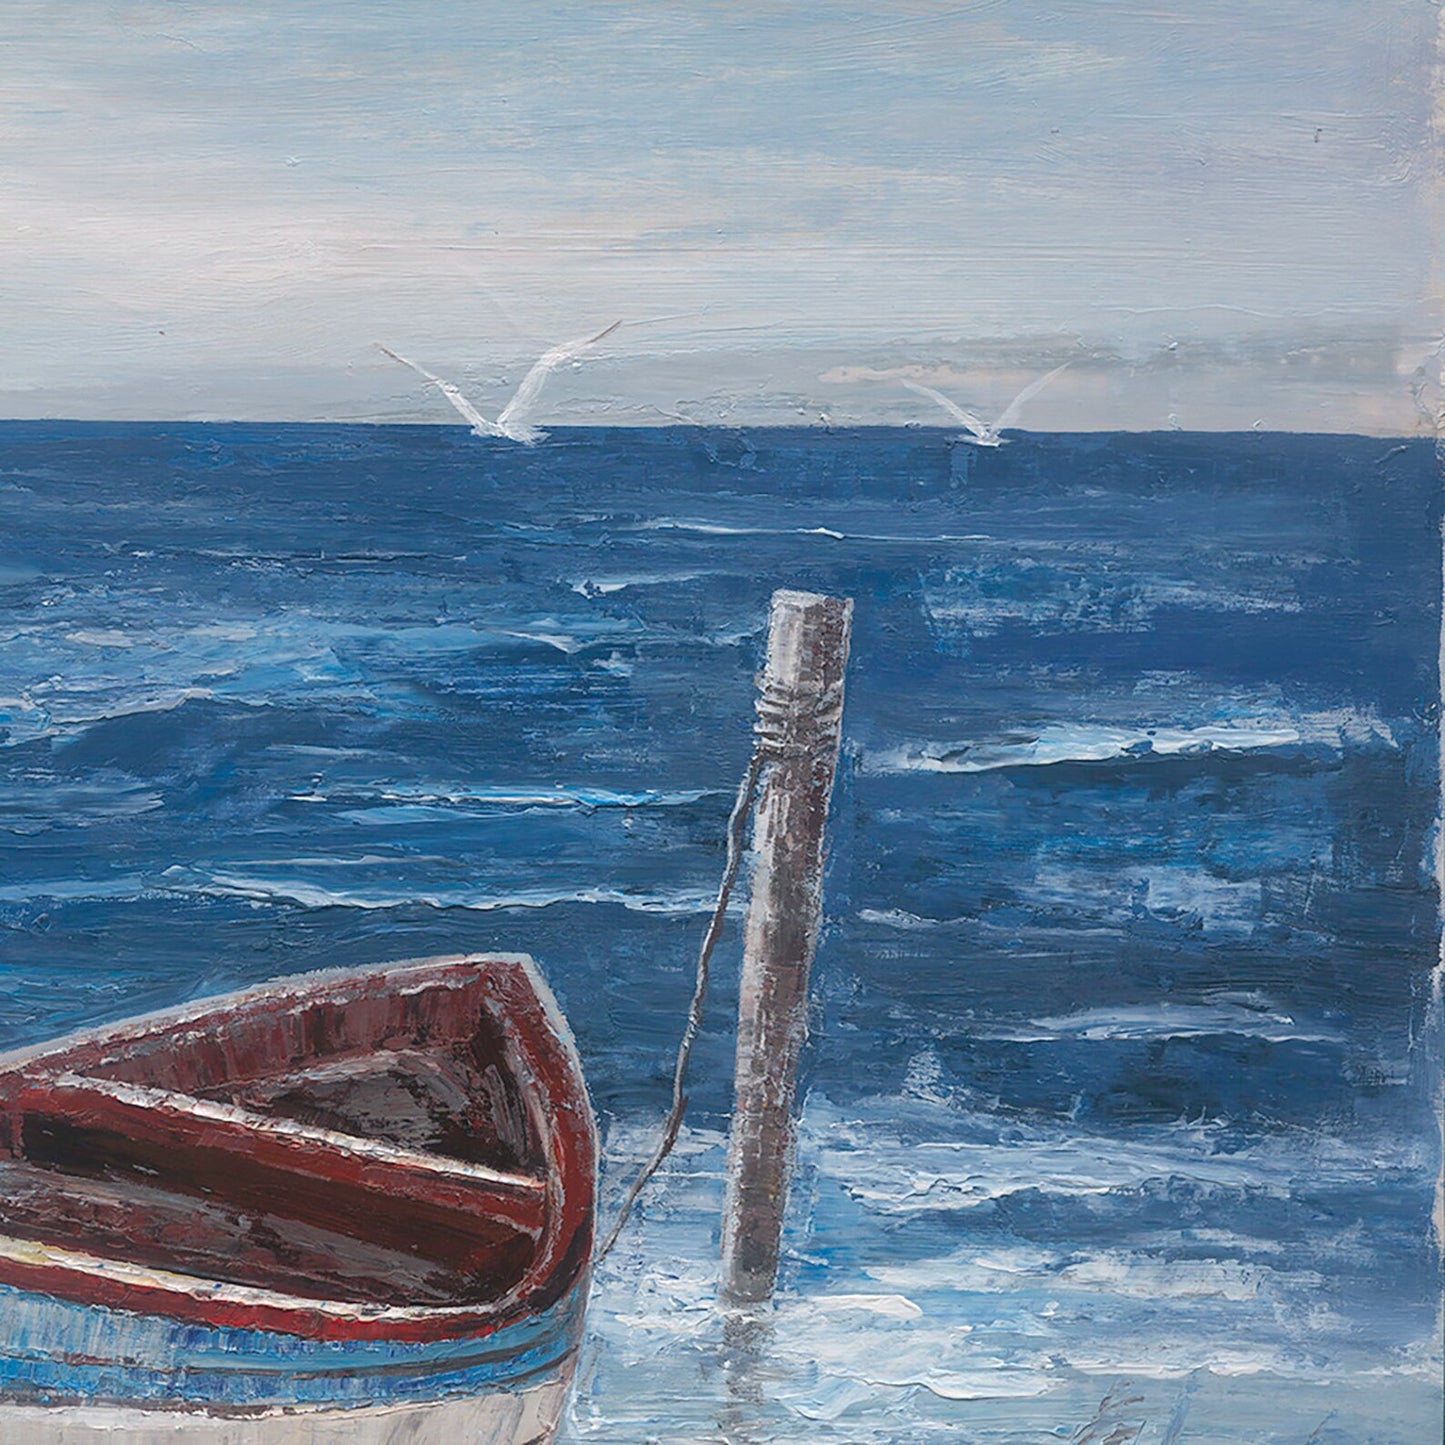 New Original artwork "Blue boat by the sea" hand-painted painting for Home decor - latest creation